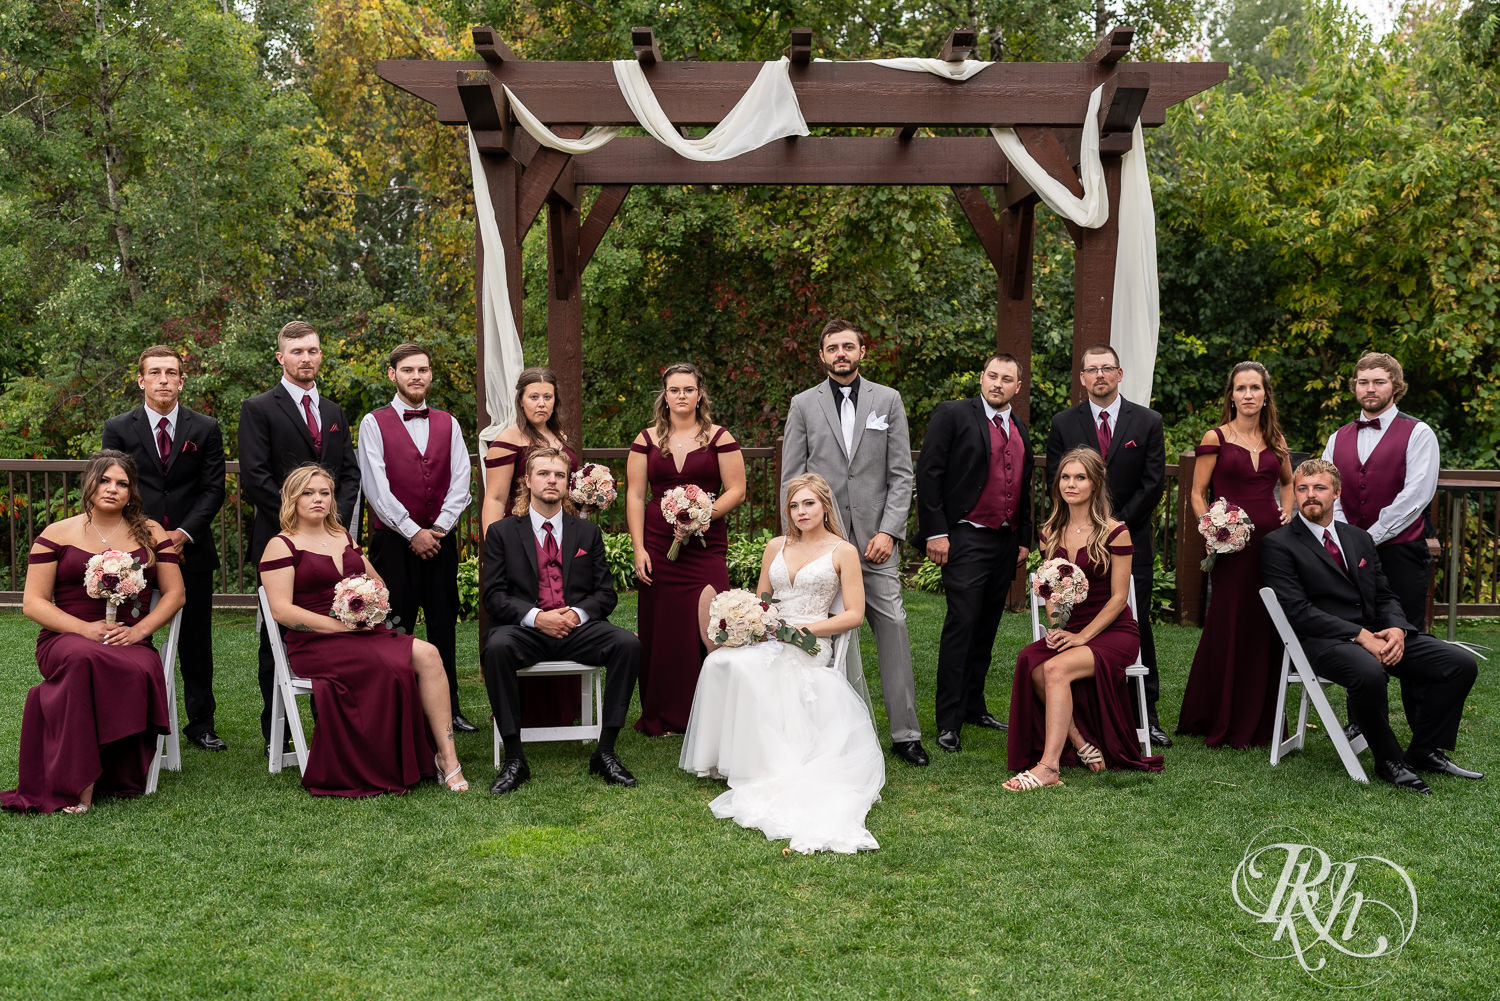 Bride and groom smile with wedding party at Bunker Hills Event Center in Coon Rapids, Minnesota.